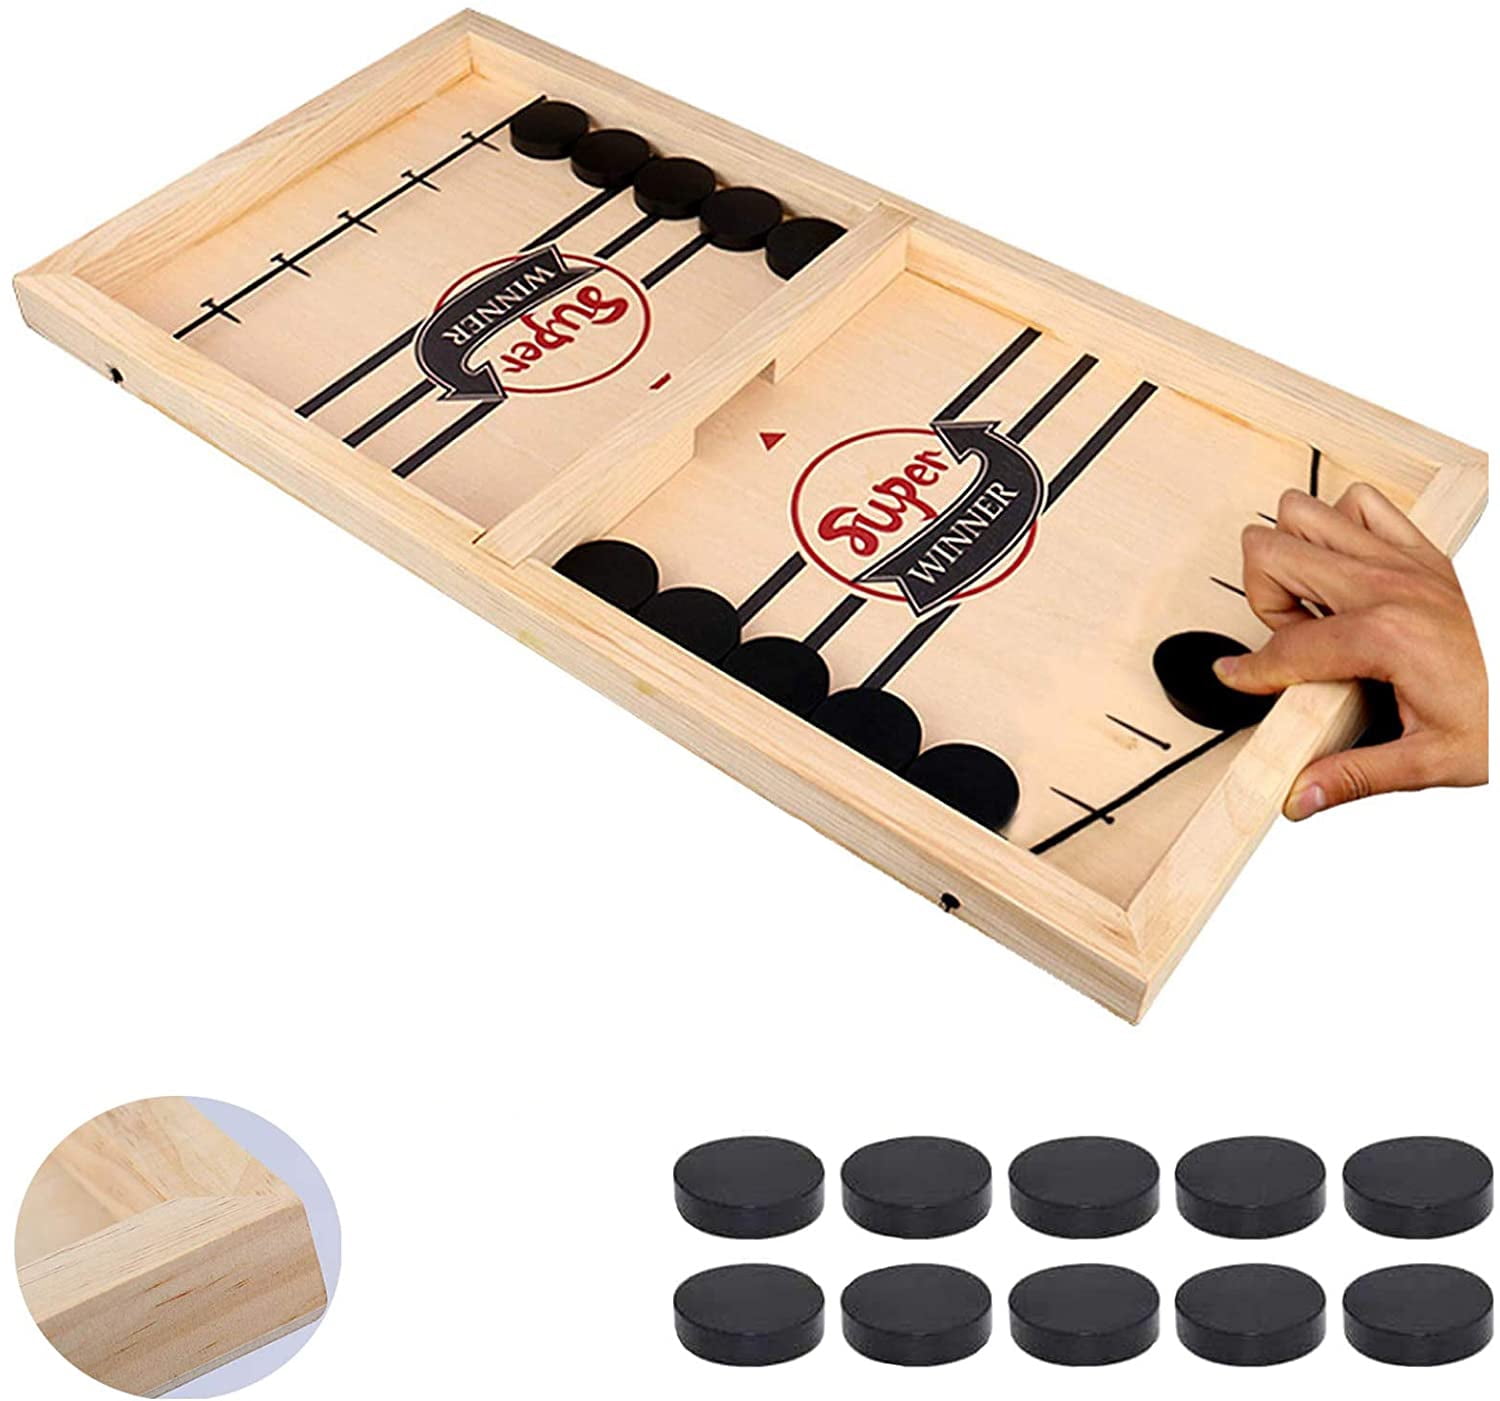 Tabletop Fast Sling Puck Game Wooden Hockey Game Slingshot Toy Rapid-Shot Catapult Chess Parent-Child Interactive Games Catapult Winner Board for Kids & Family 1pc, 35X22X2.5cm 